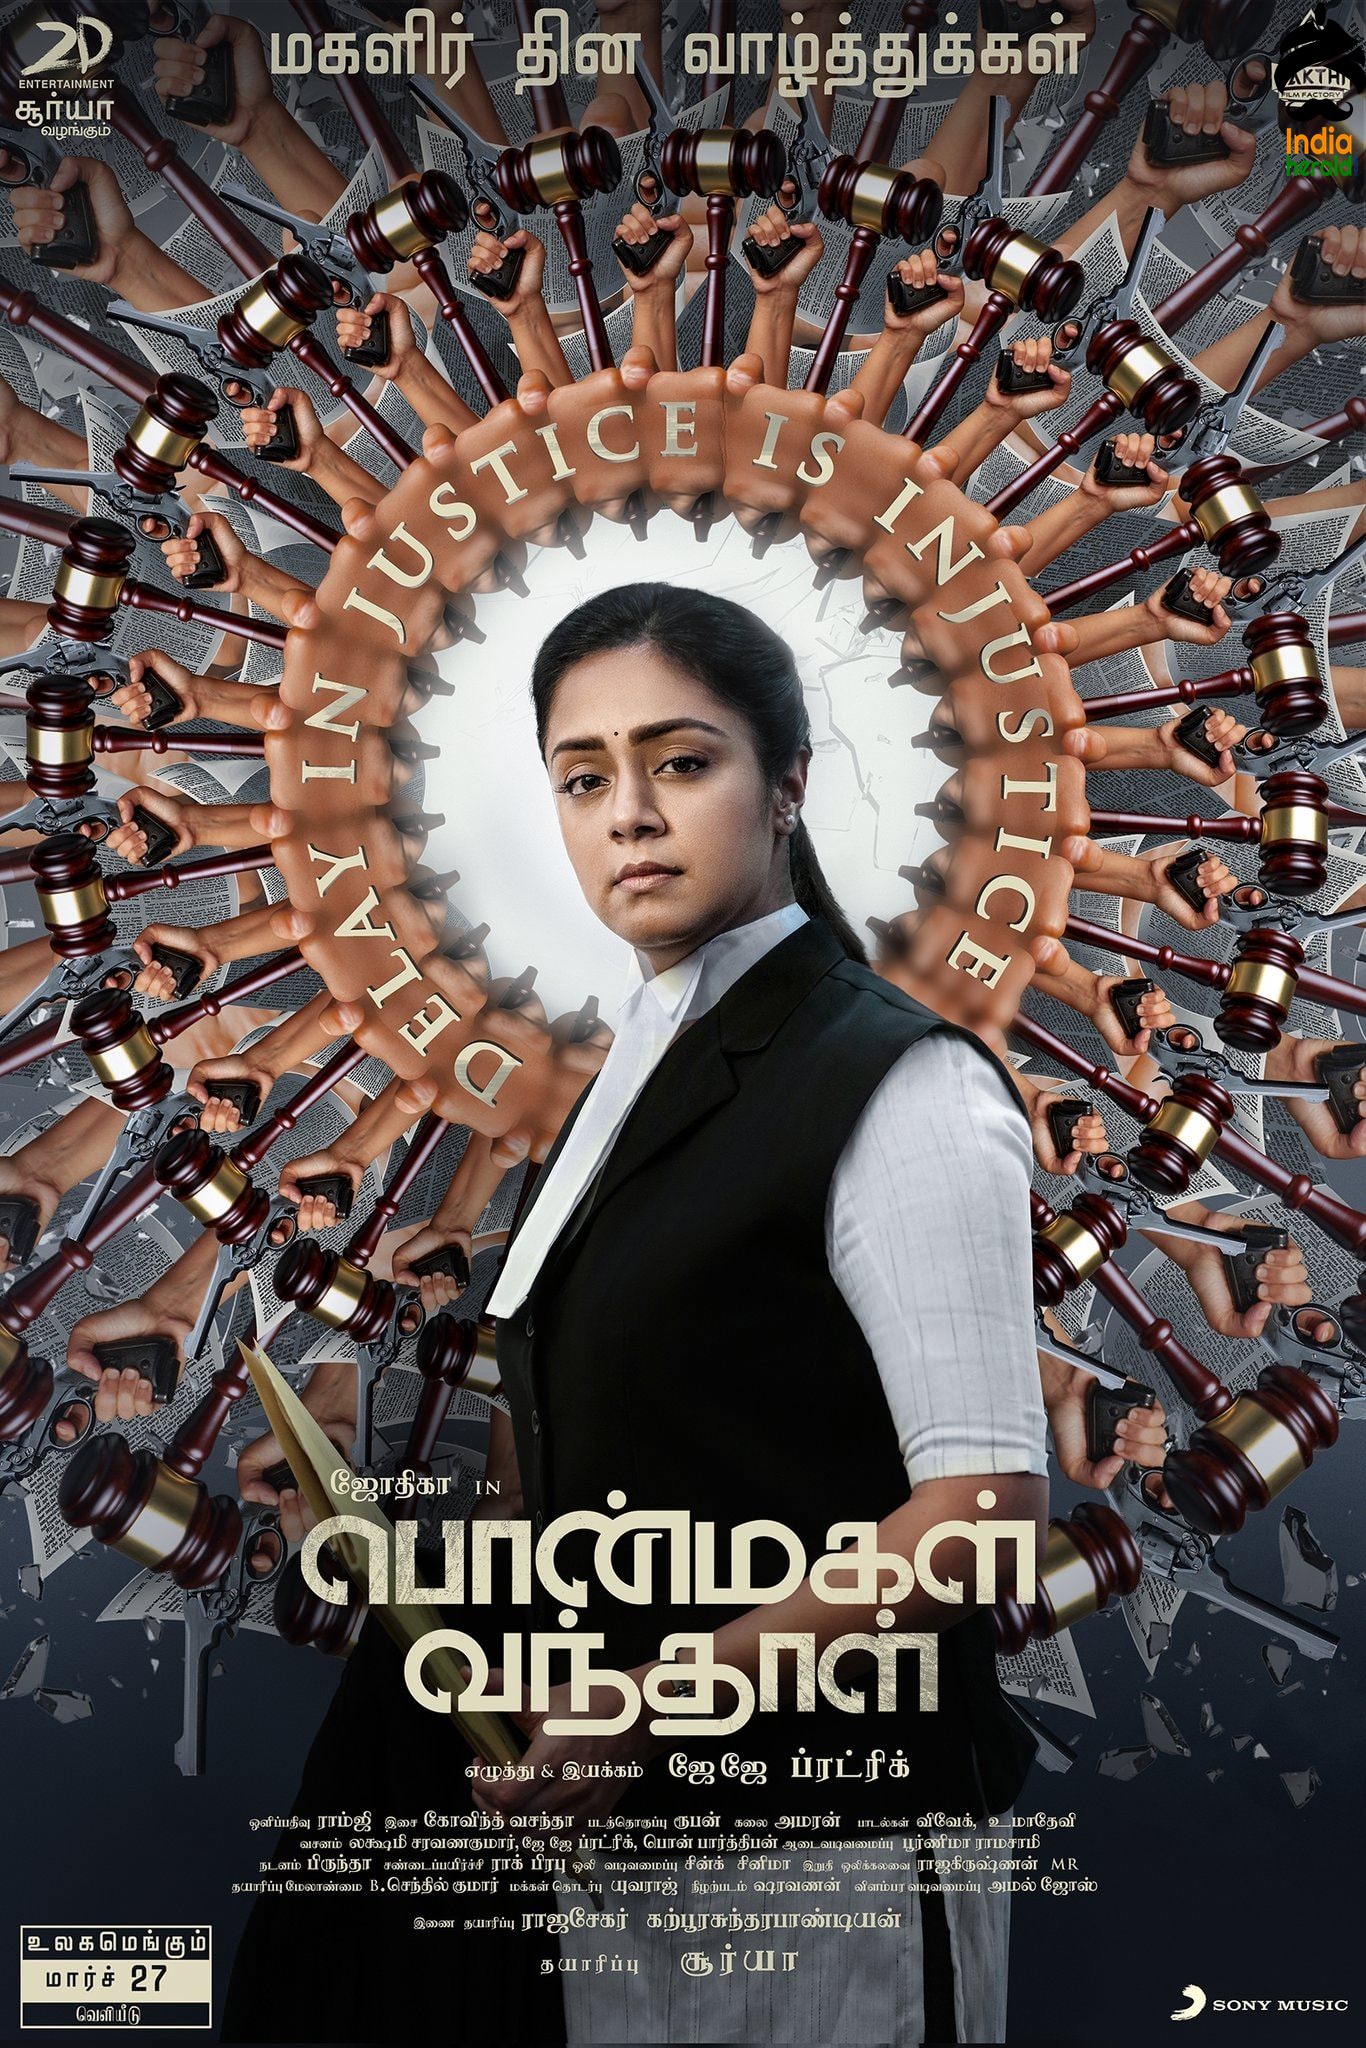 Womens day special poster from Jyothika starrer Ponmagal Vandhal team